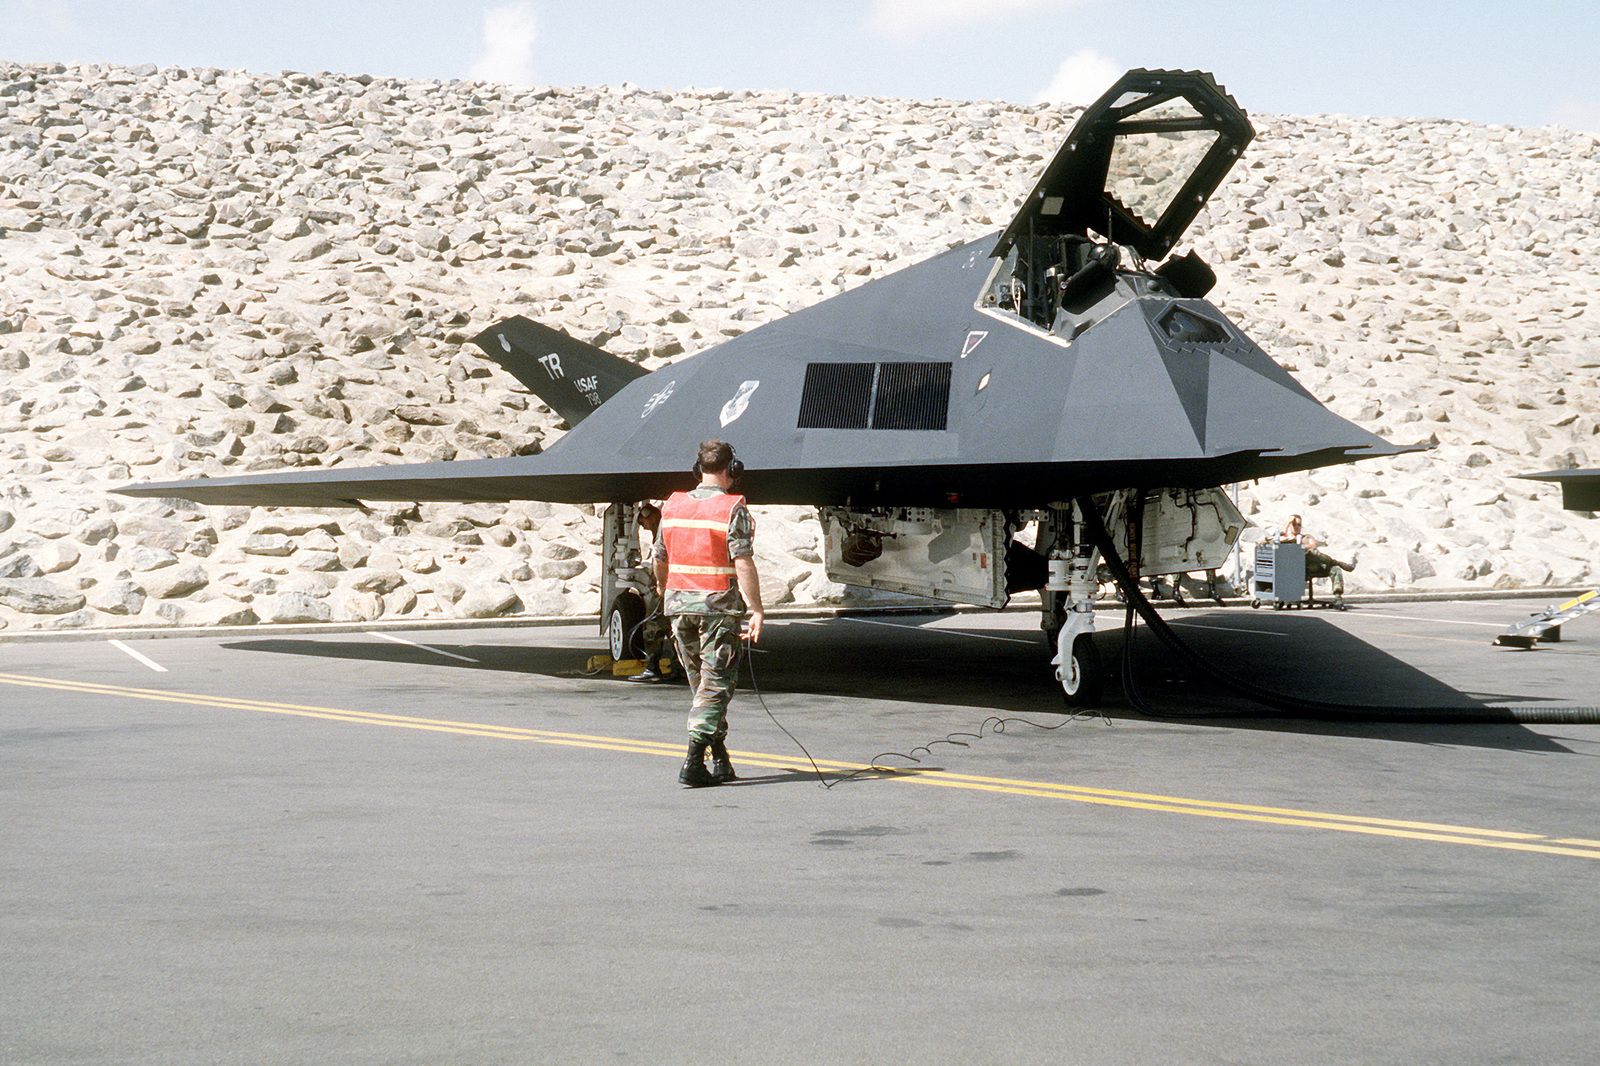 a-ground-crewman-communicates-with-the-pilot-of-an-f-117a-stealth-fighter-aircraft-4c6c33-1600